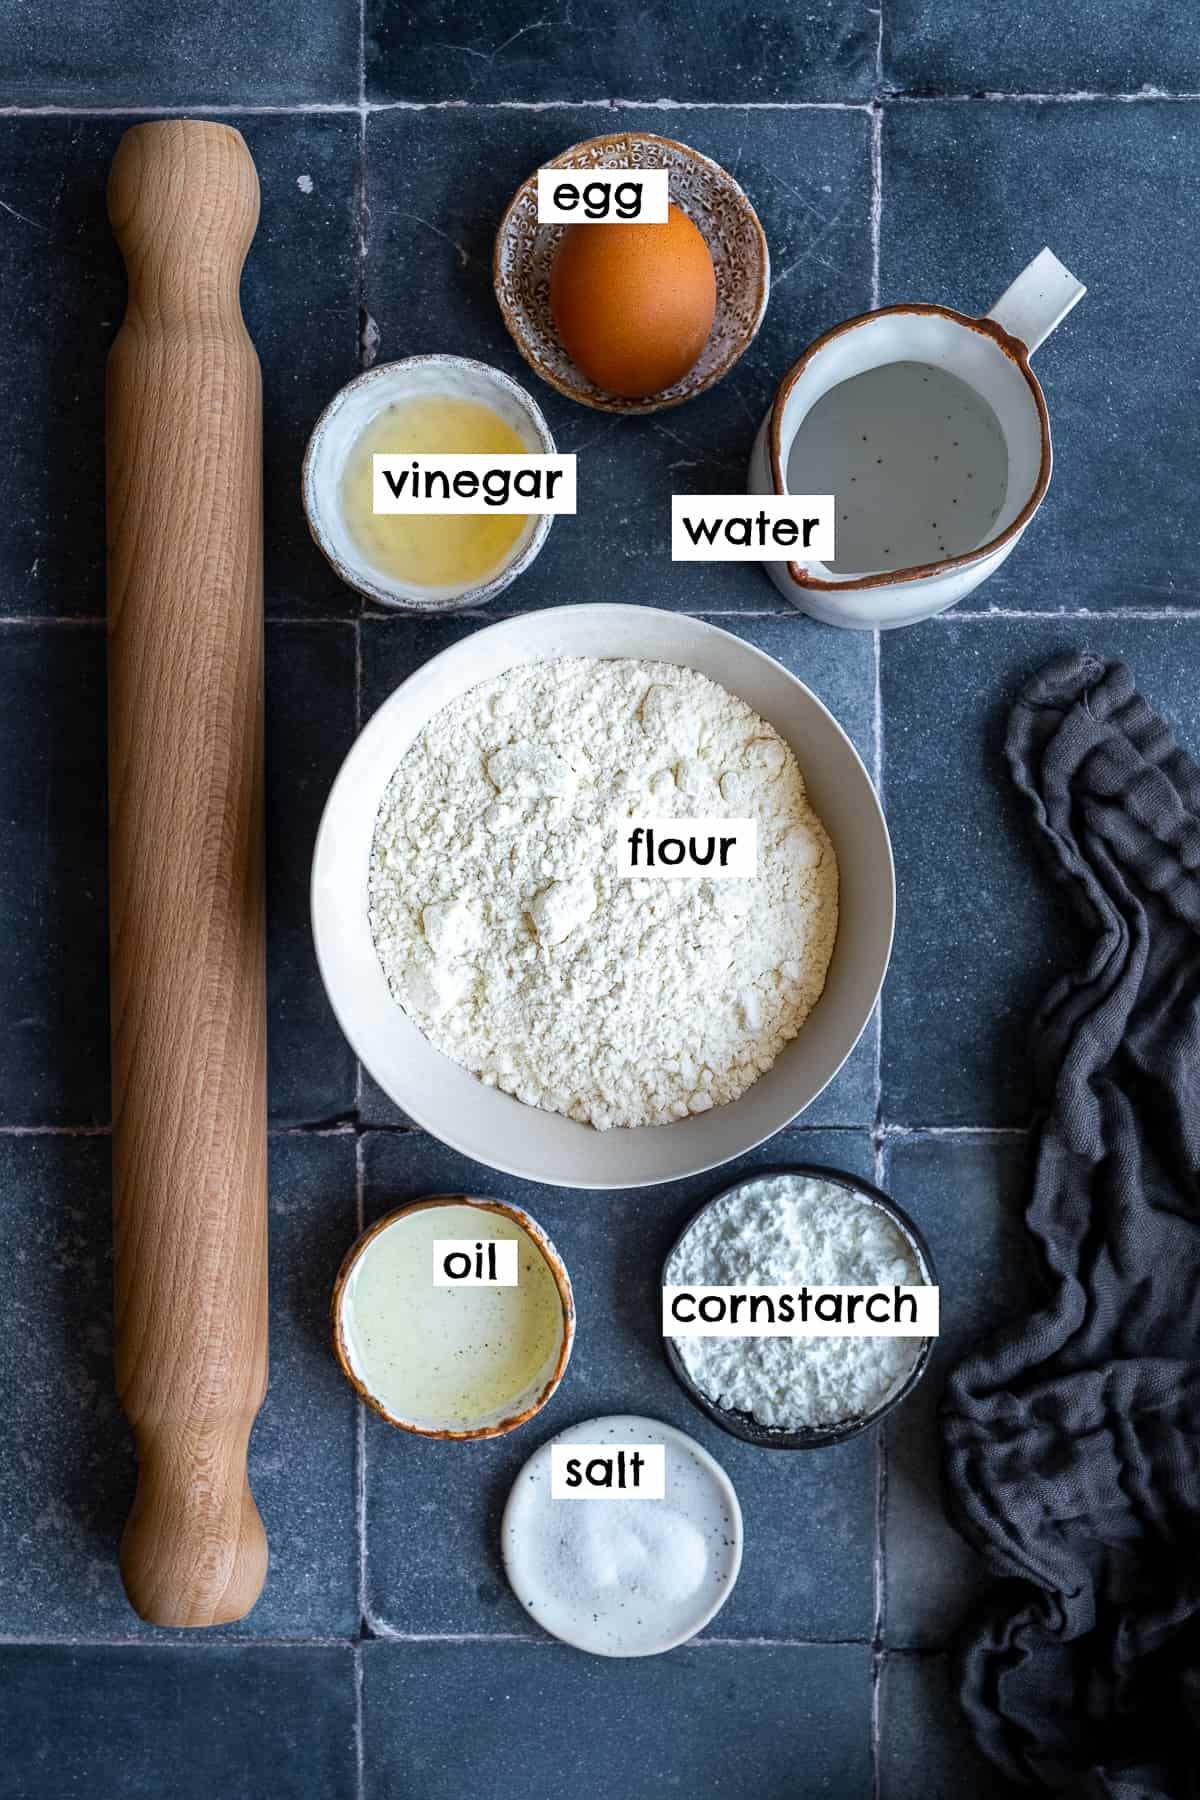 An egg, some flour, cornstarch, salt, oil, vinegar, water and a rolling pin pictured on a grey background.